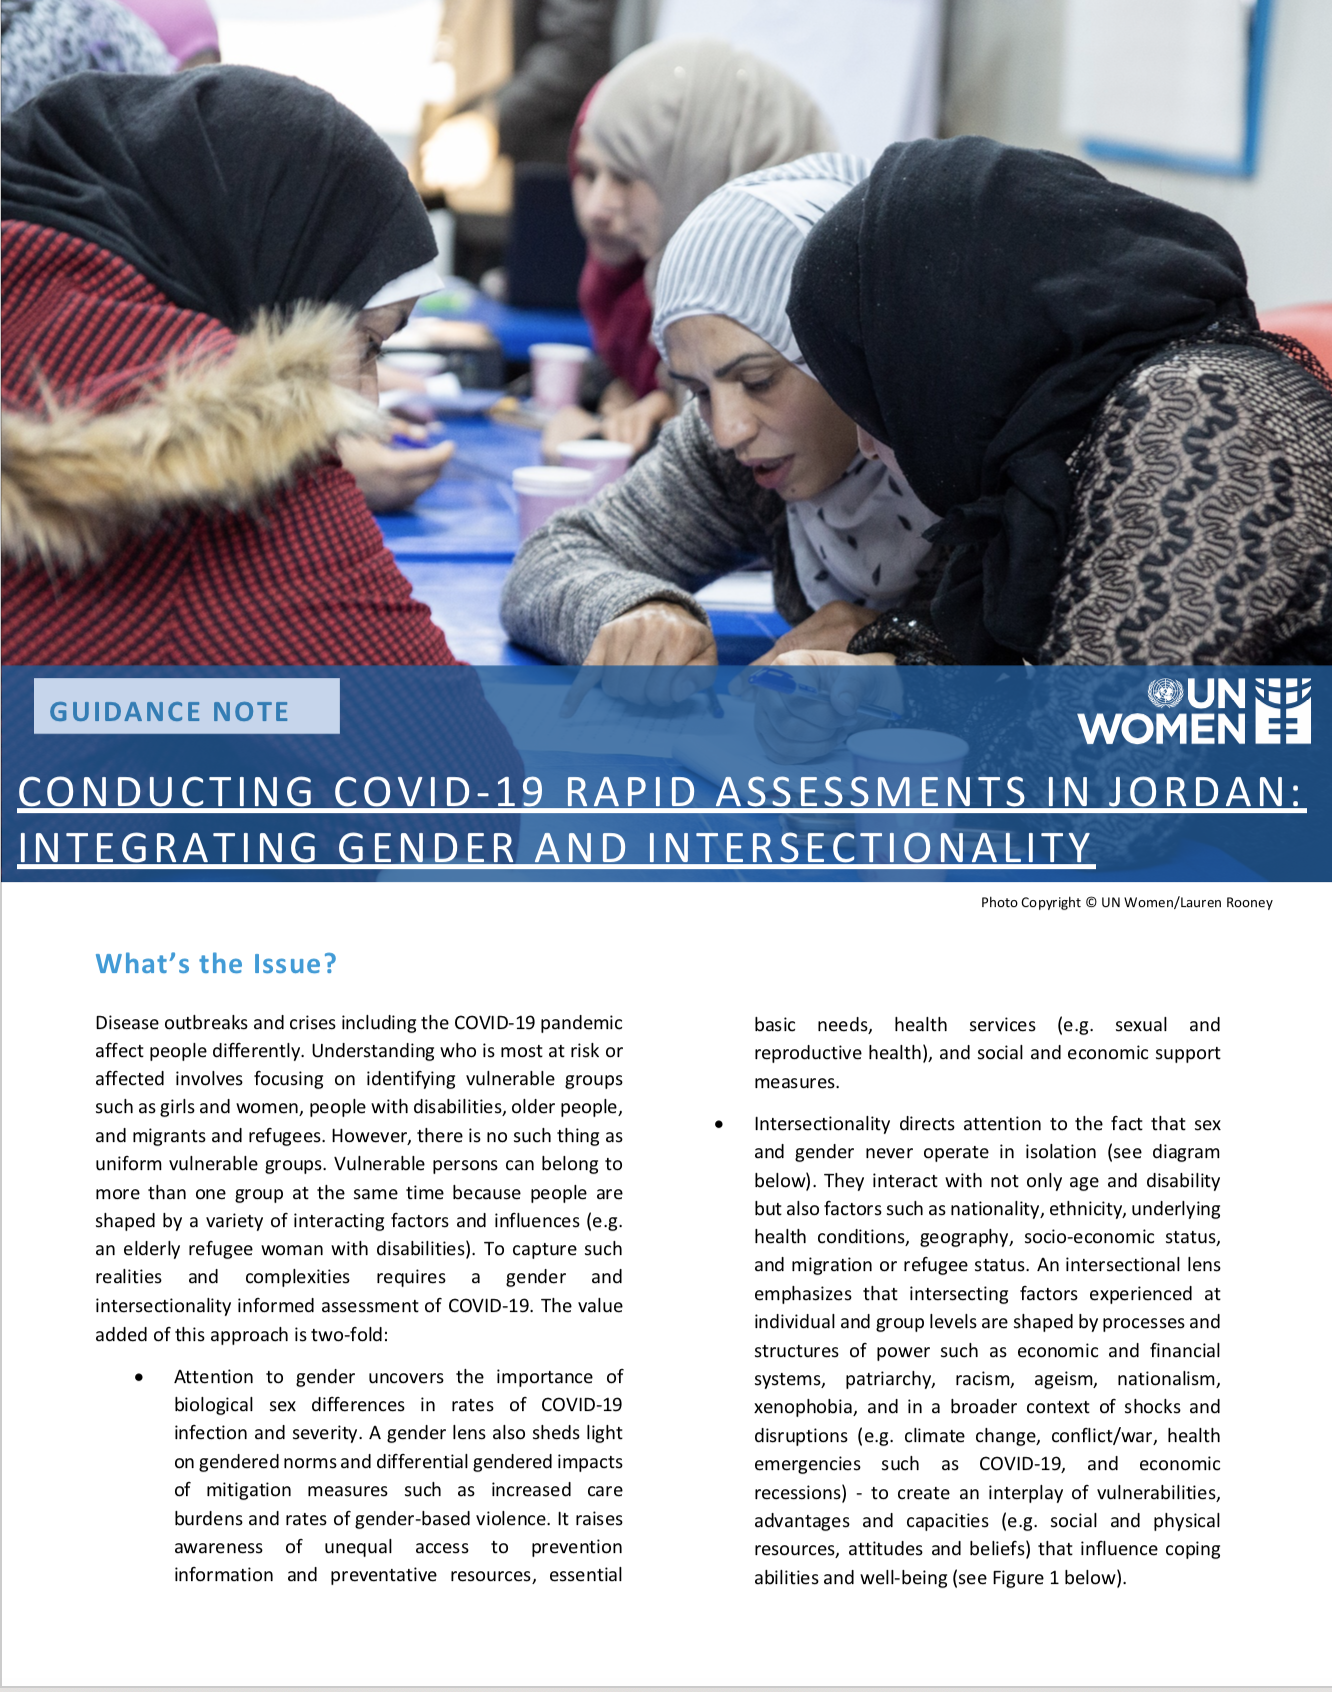 CONDUCTING COVID-19 RAPID ASSESSMENTS IN JORDAN: INTEGRATING GENDER AND INTERSECTIONALITY